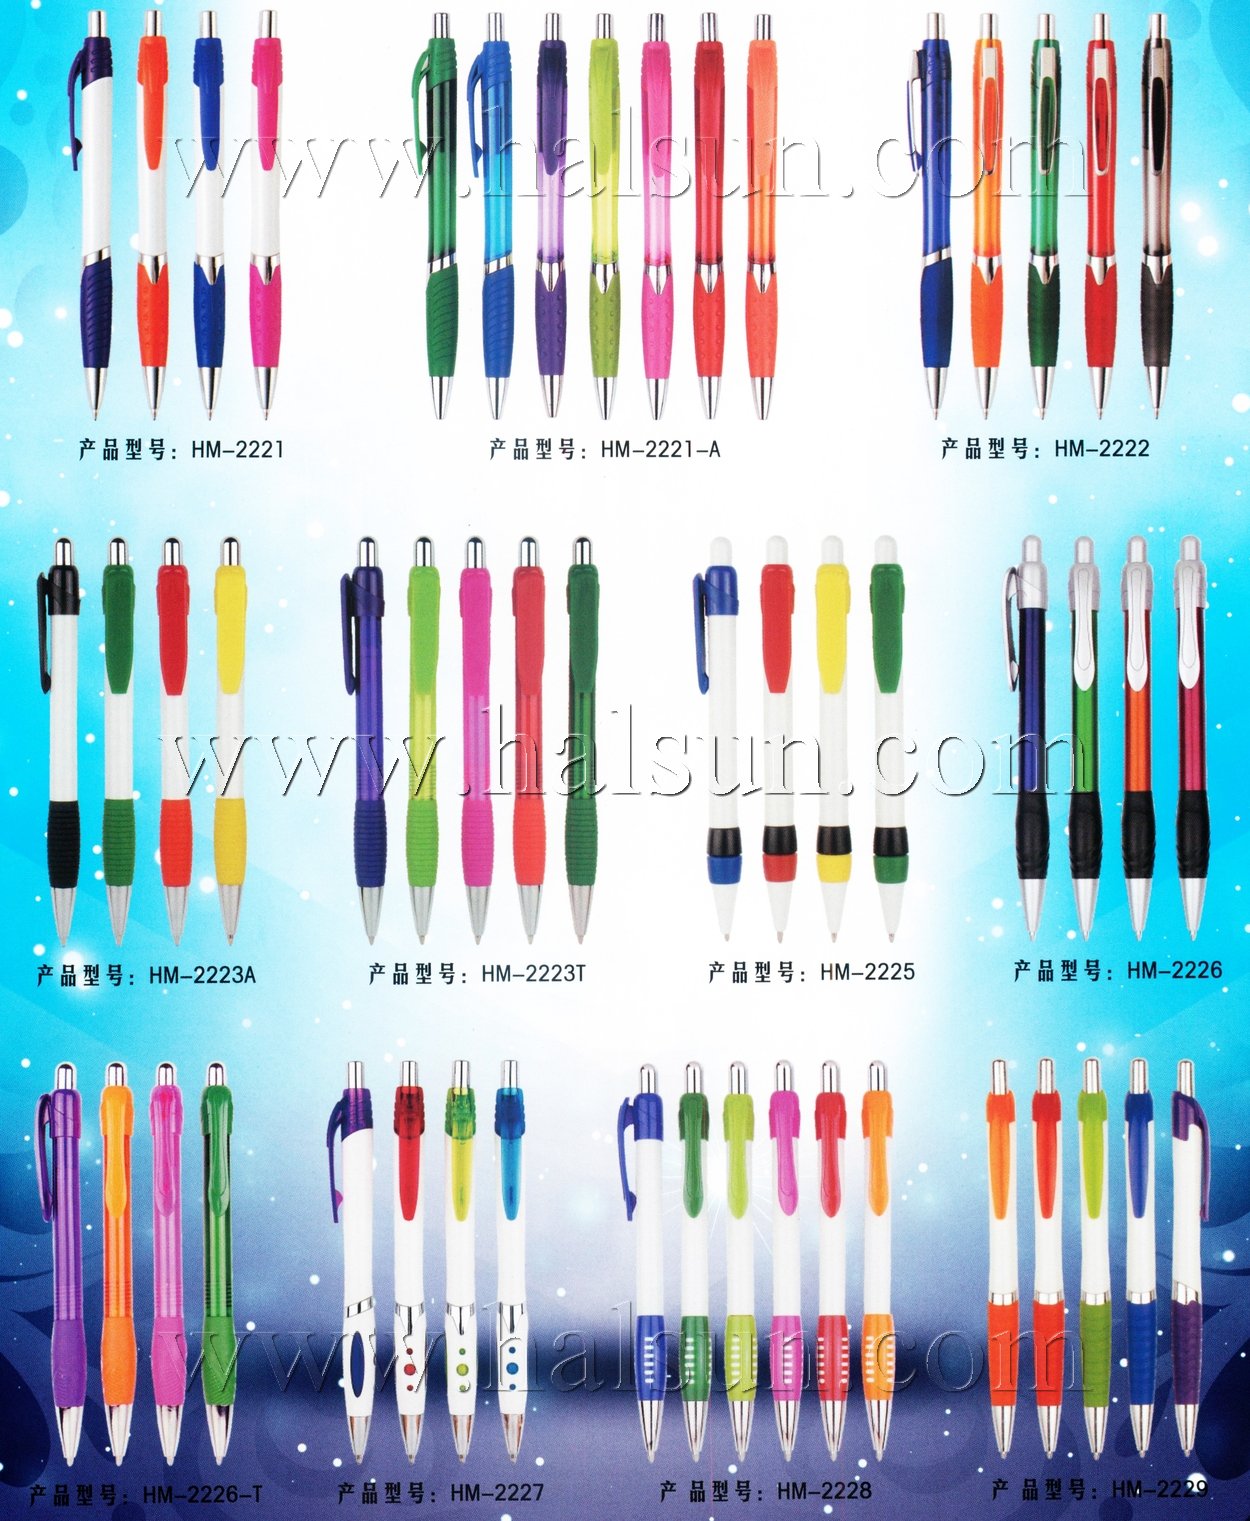 High Quality Low Cost premium pens,2015_08_07_17_31_09